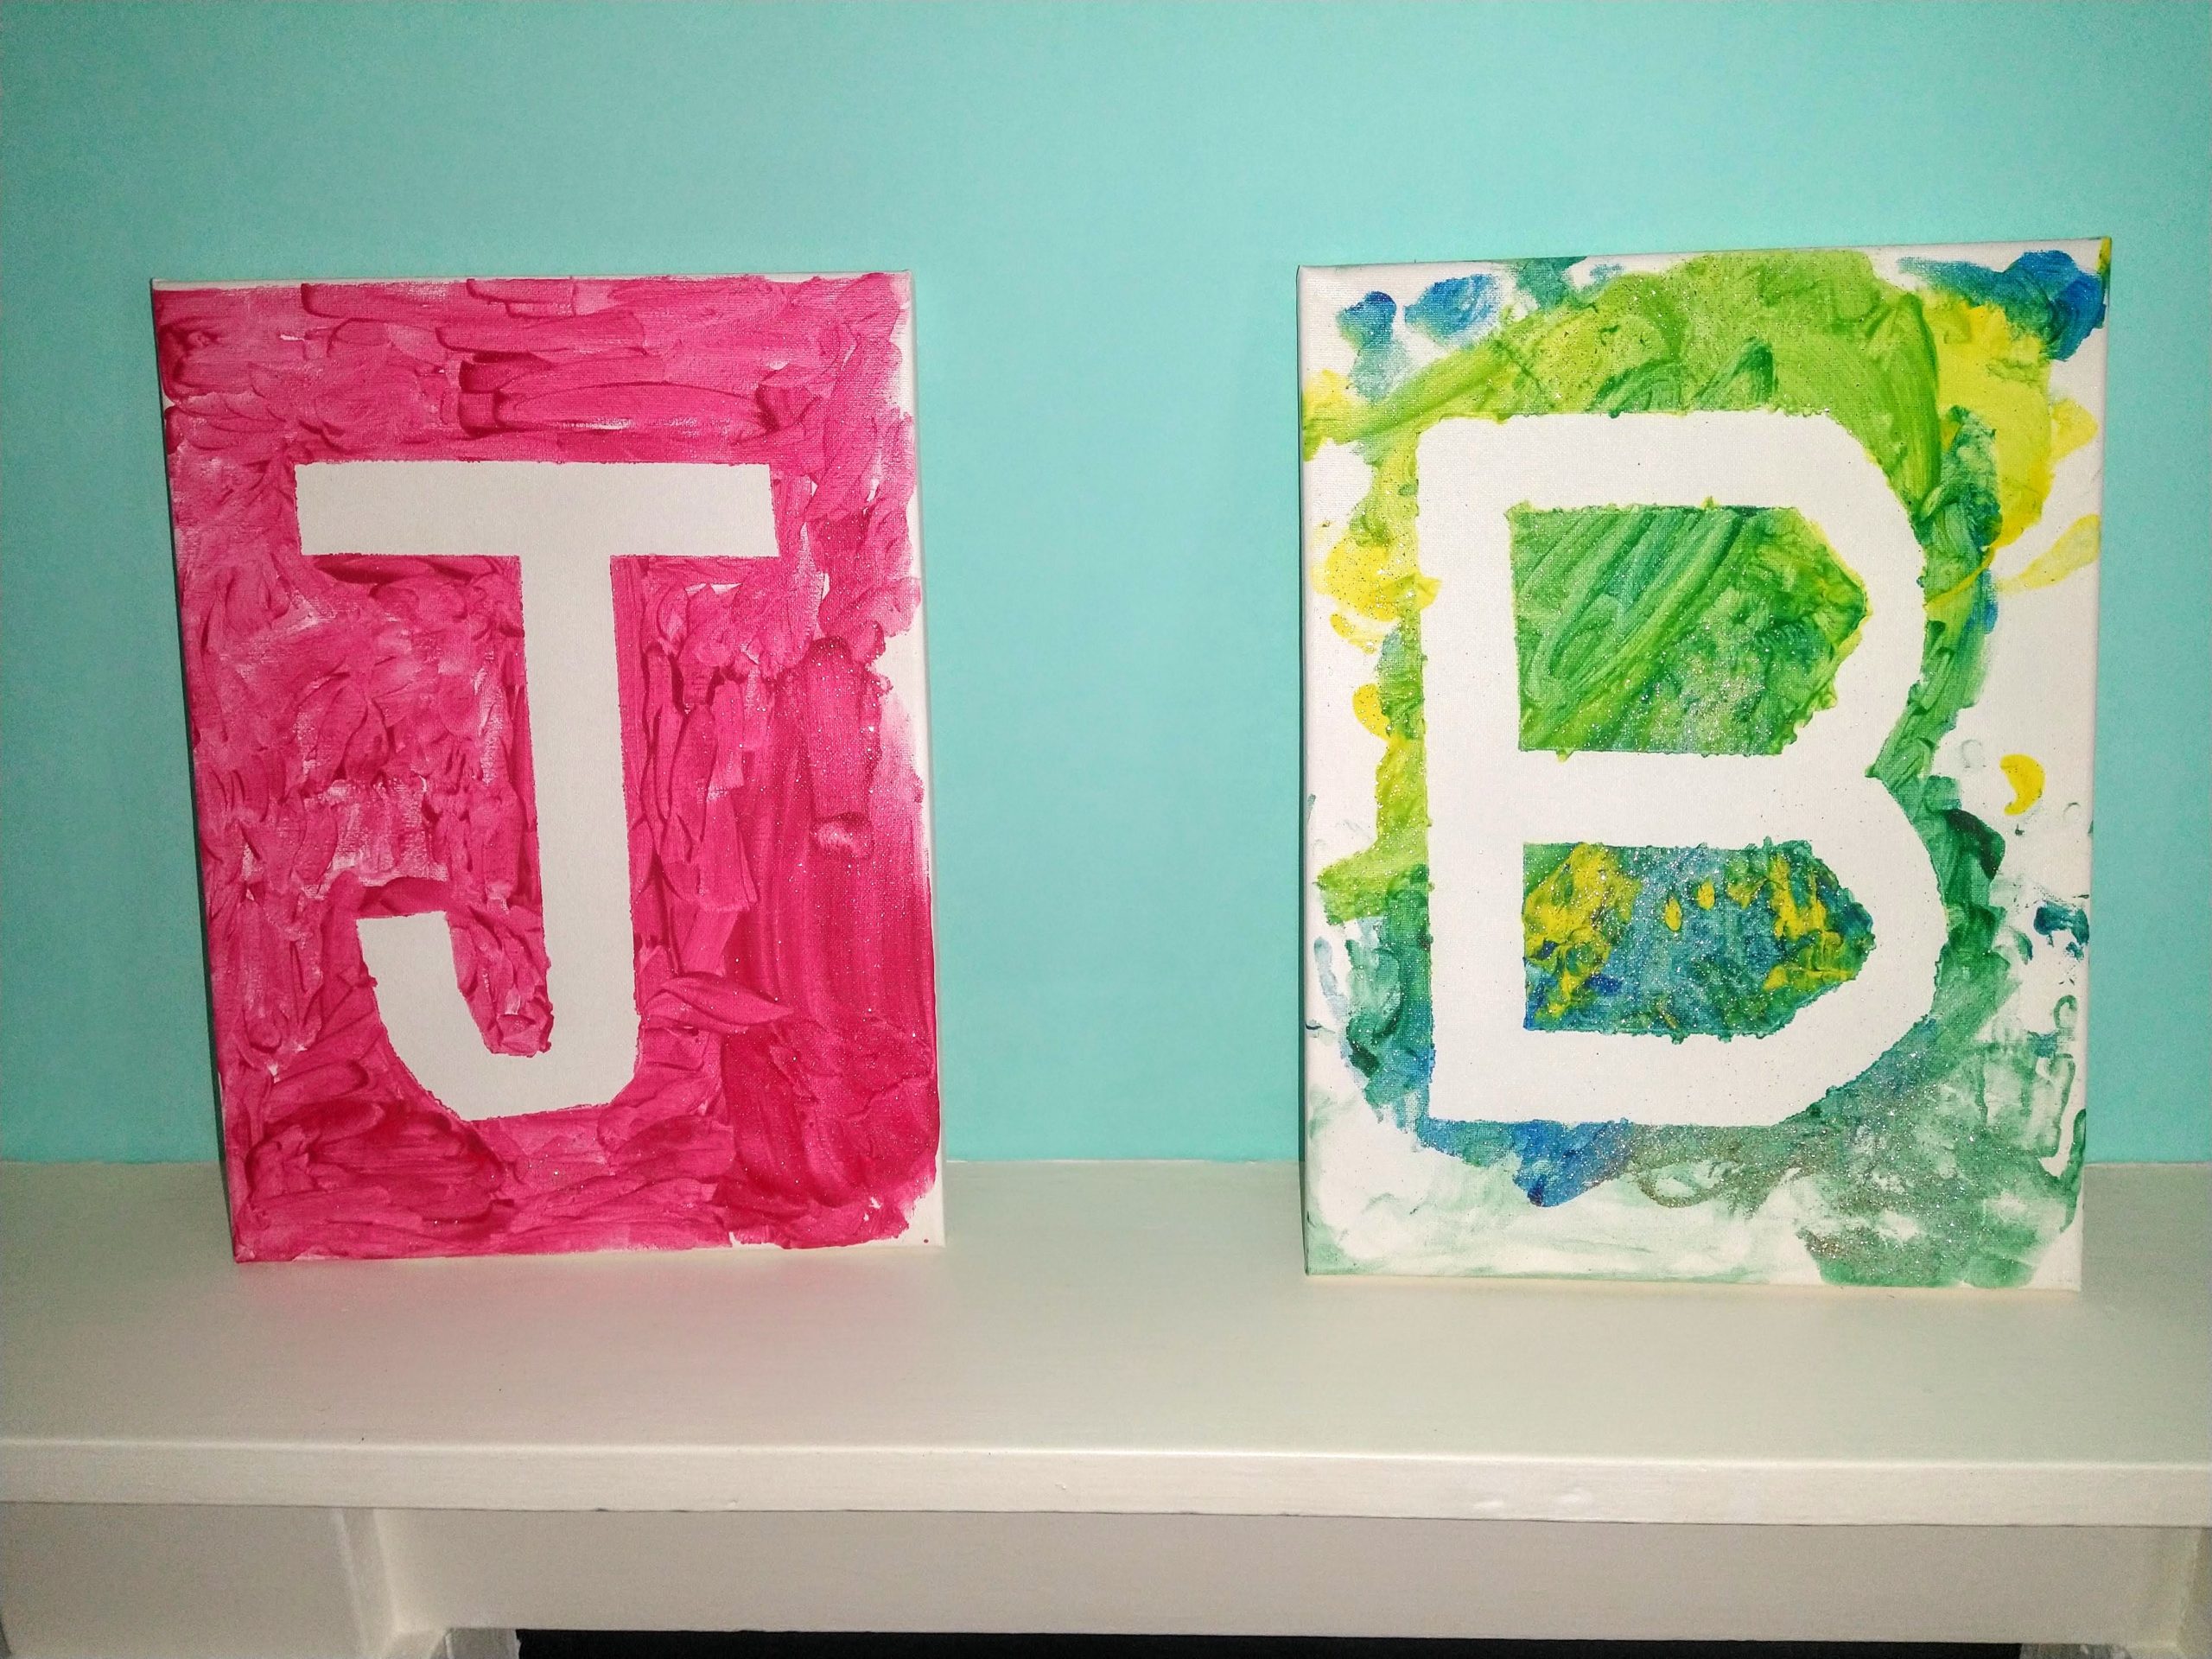 Two large canvas boards sit on a white mantle piece against a turquoise wall. They are painted with the initials on. The first is painted red with a J and has been painted with accurancy and small strokes. The second is the letter B. The background is painted with multiple colours blue, green and yellow with glitter over the top. This has been painted haphazardly but looks wonderful.